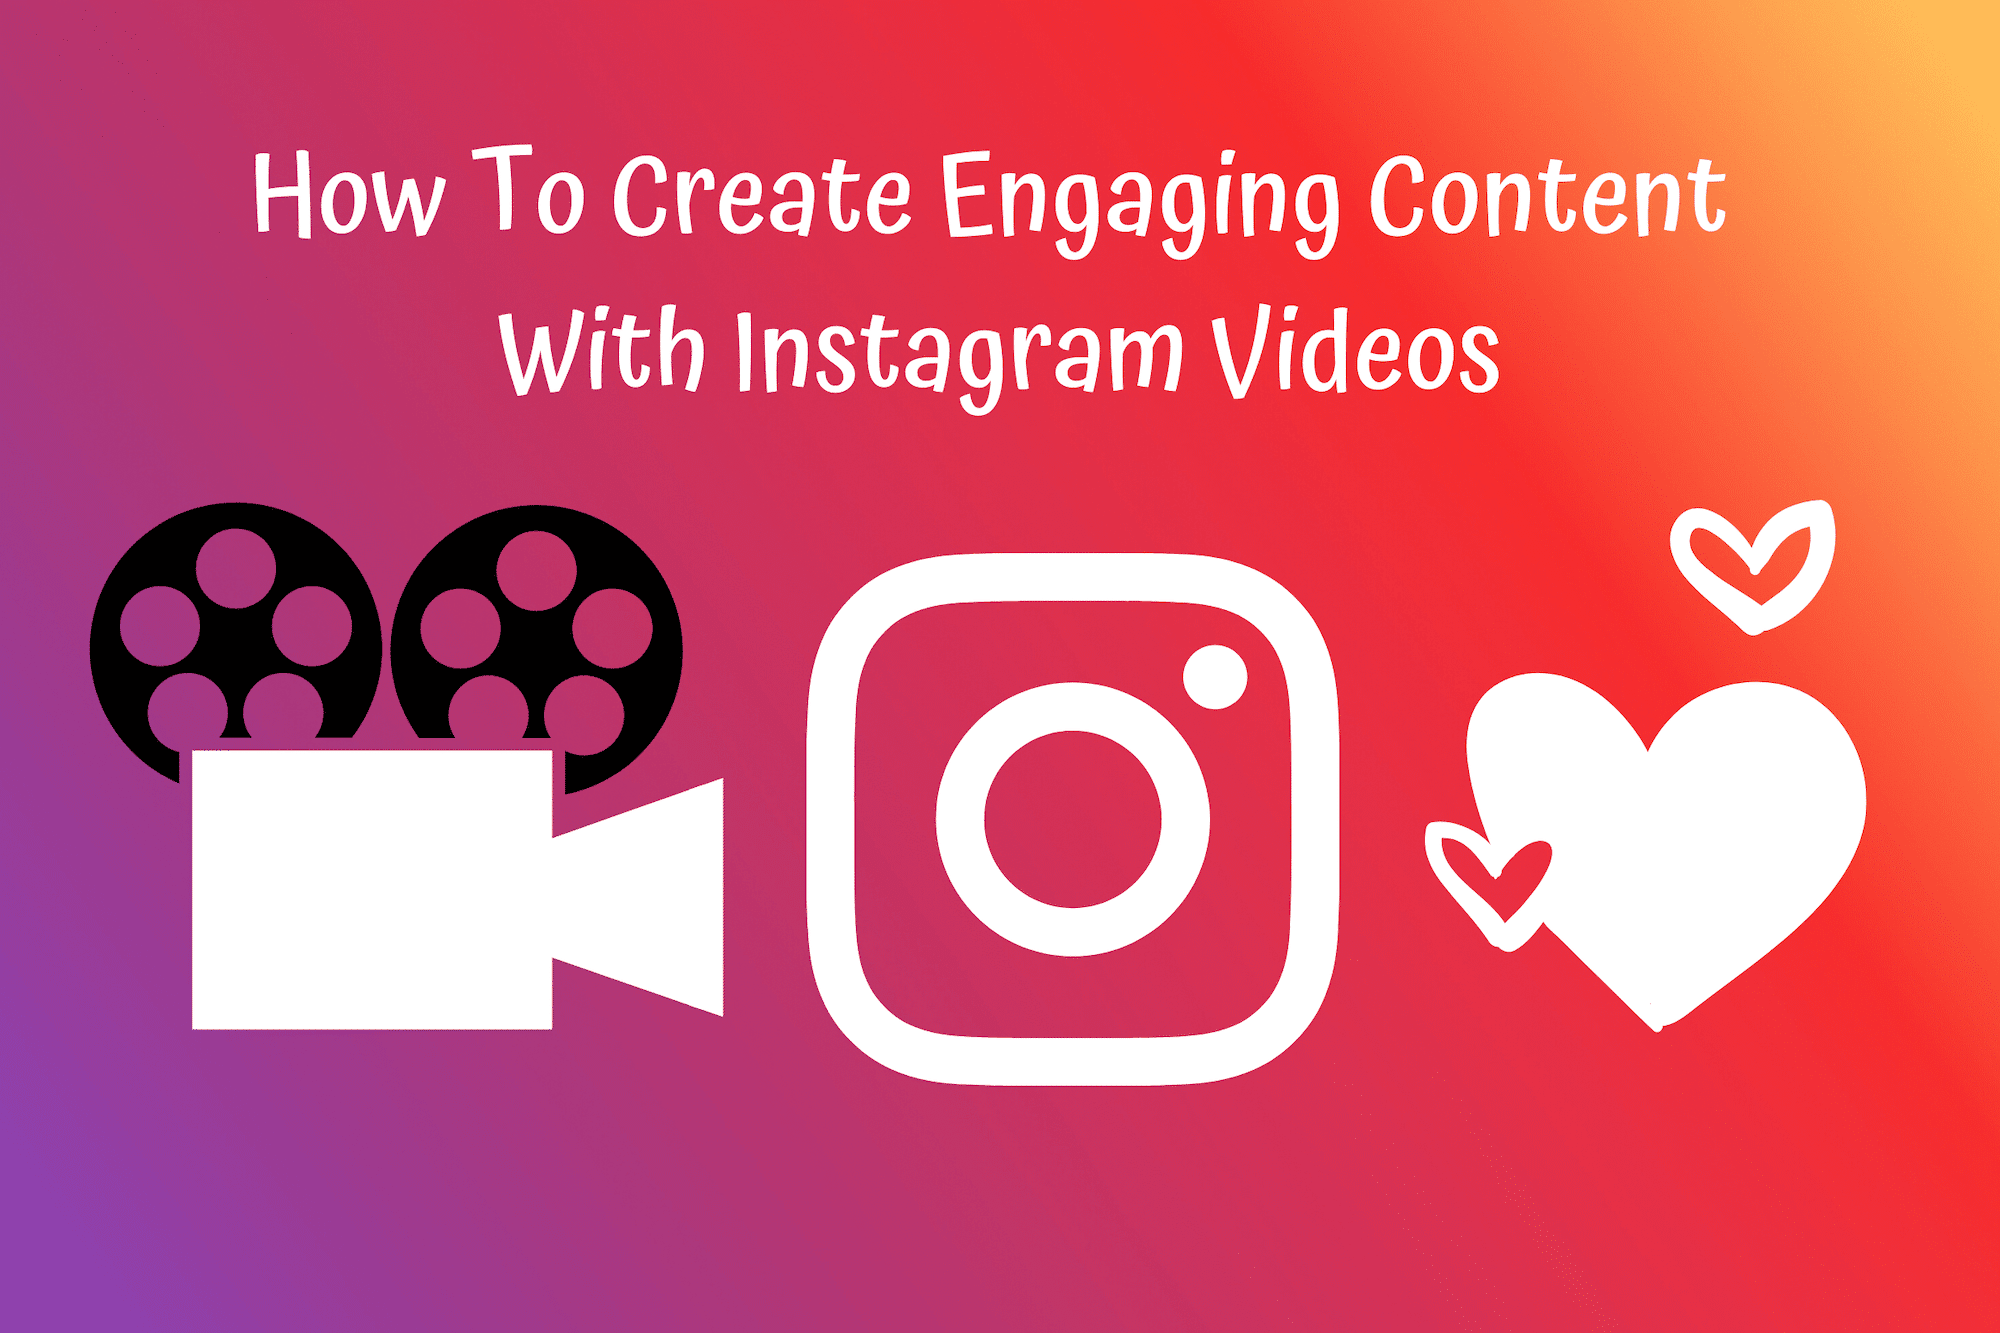 How To Create Engaging Content With Instagram Videos